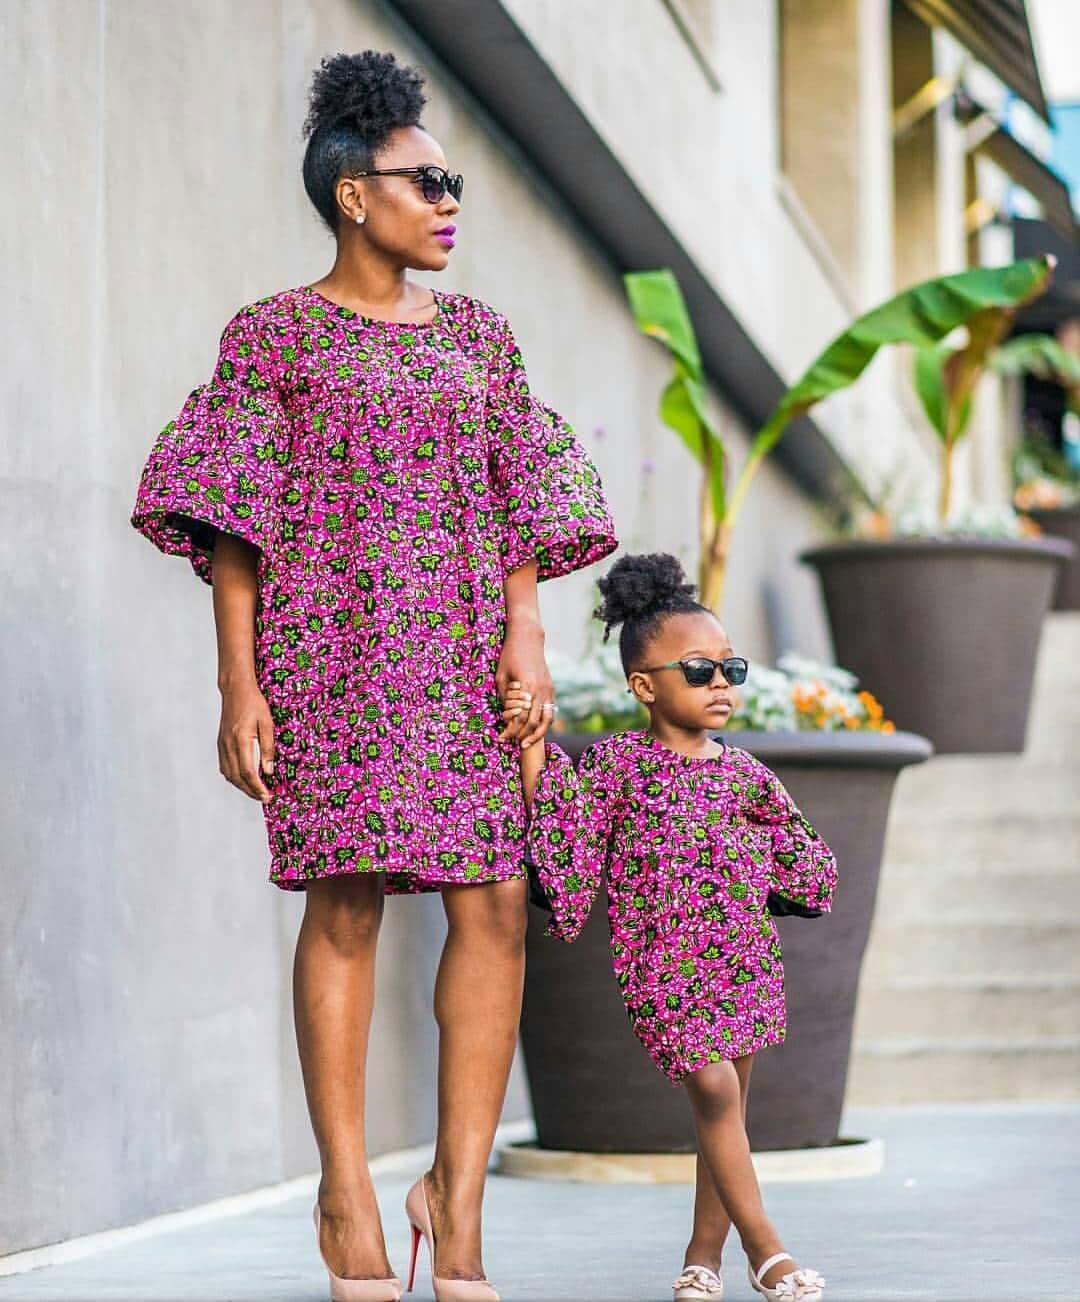 Adorable Ankara Styles For Kids - The Glossychic